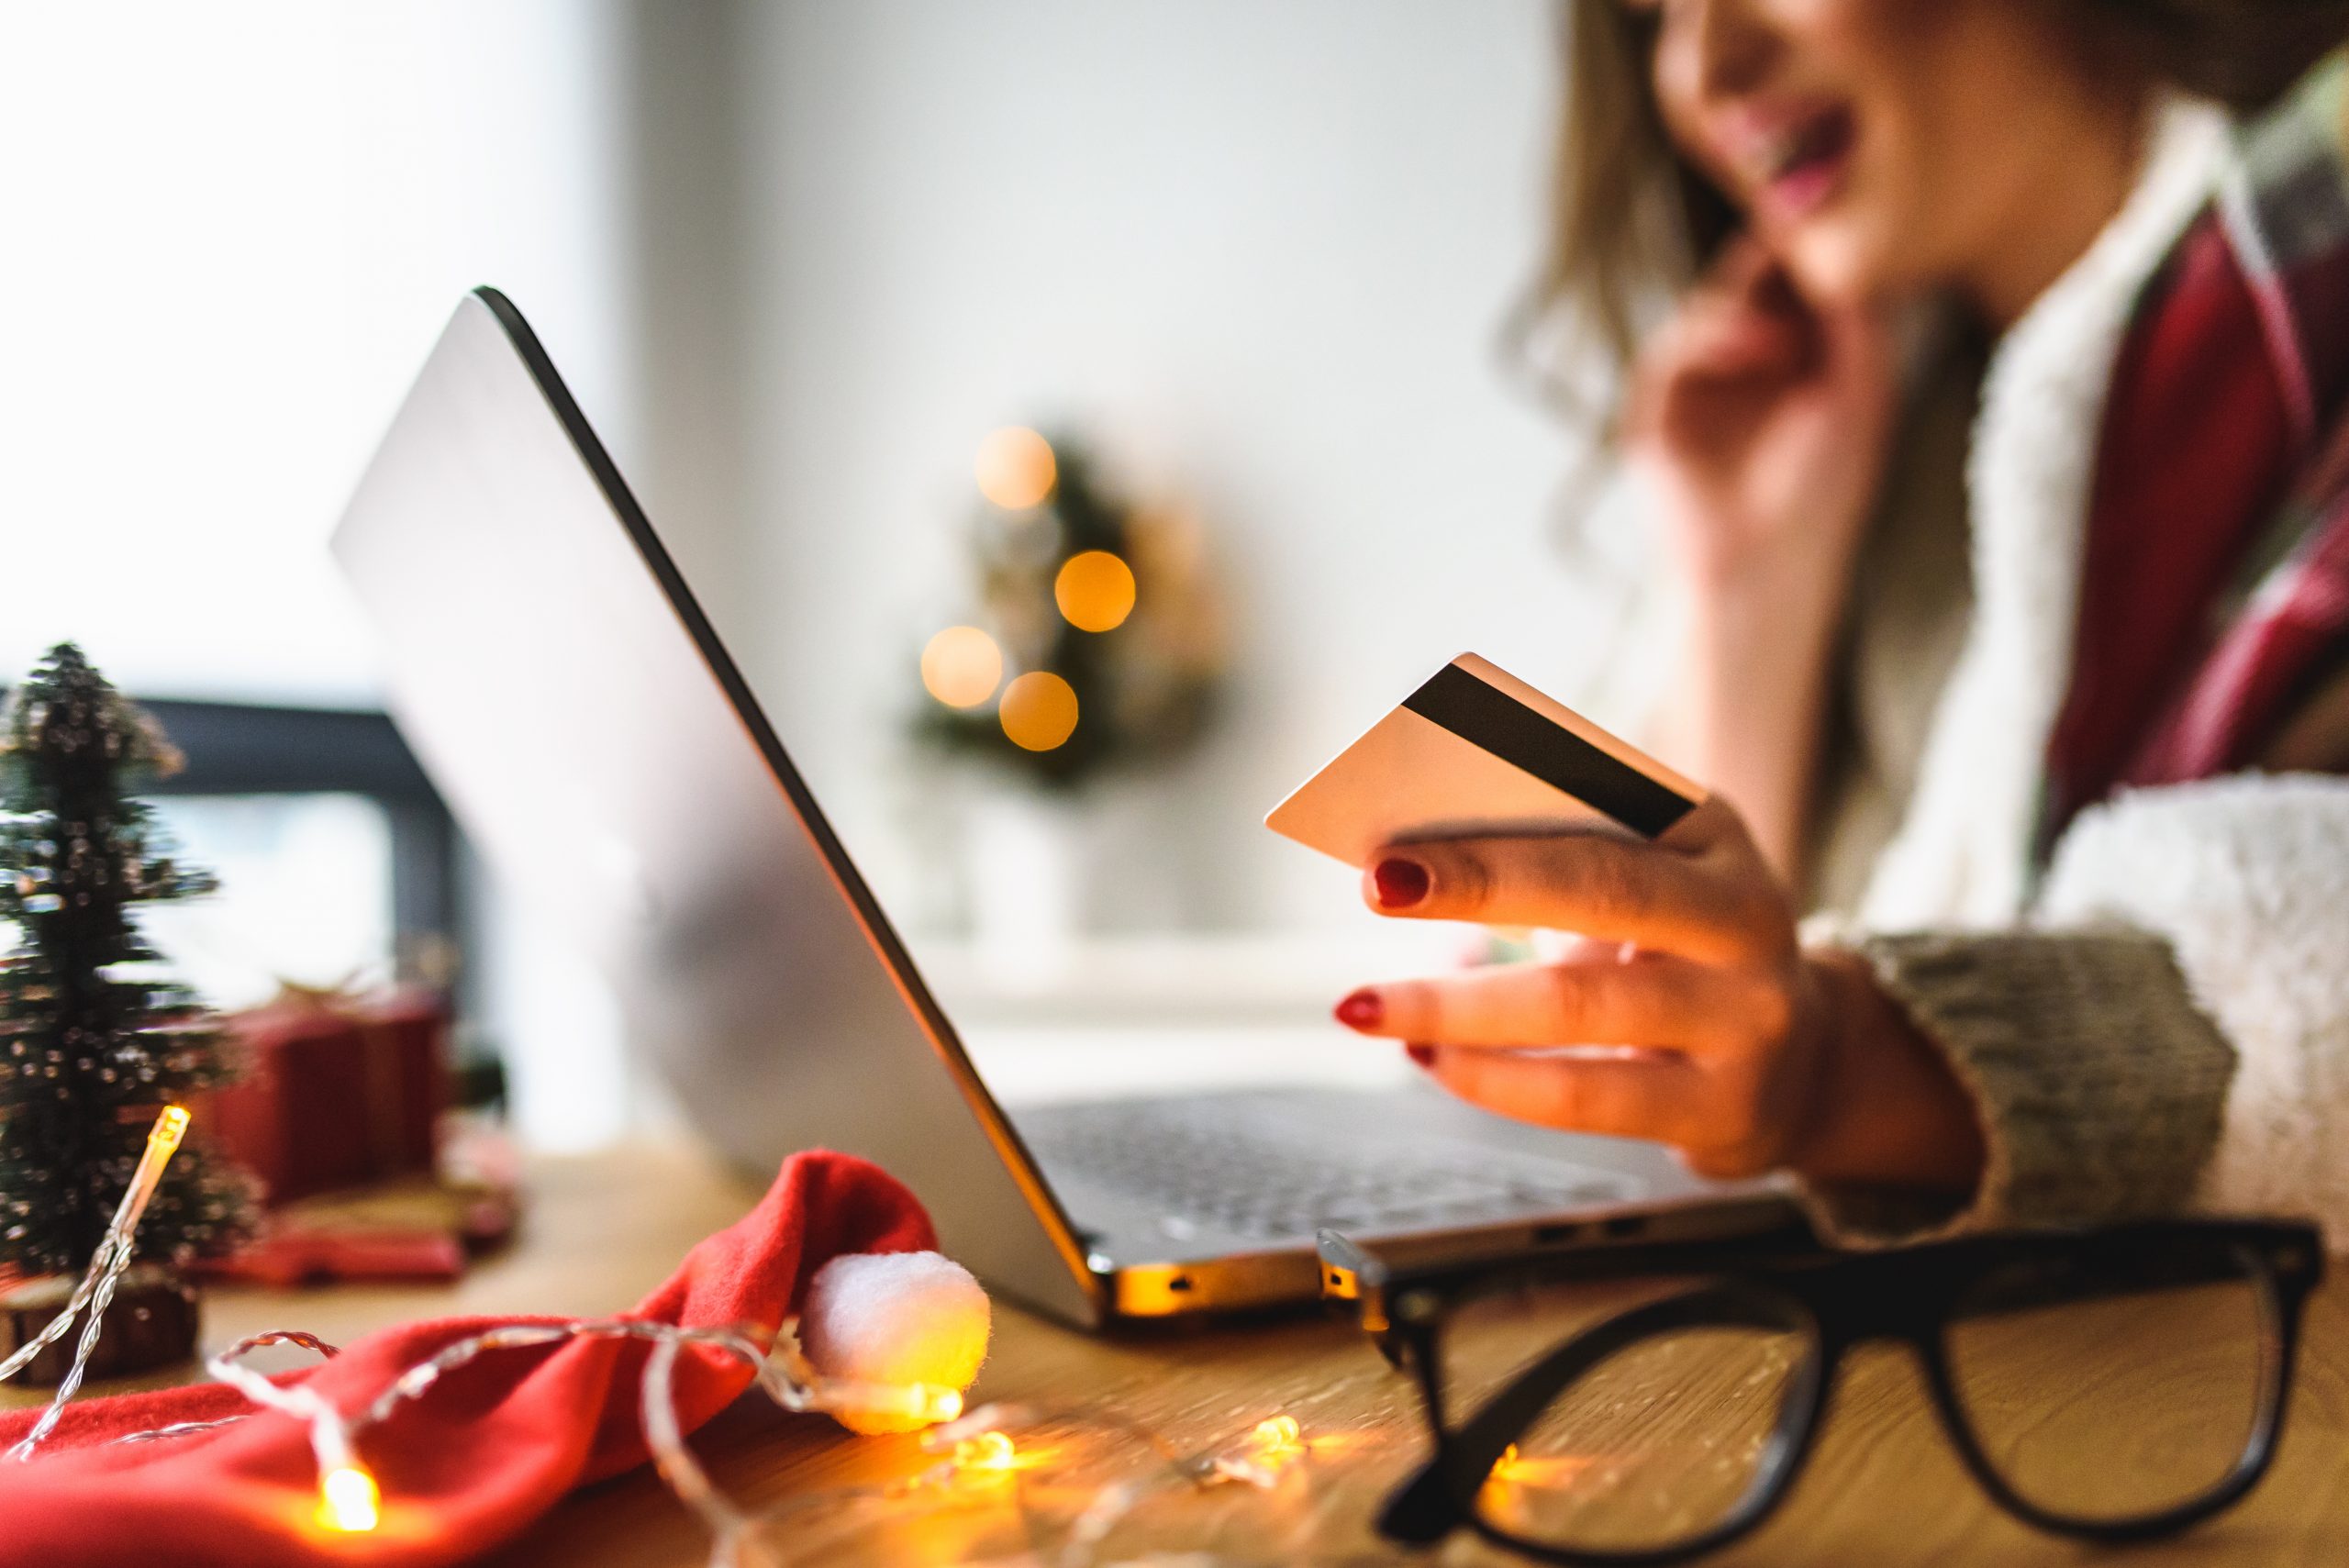 7 Tips for Safer Online Shopping this Holiday Season